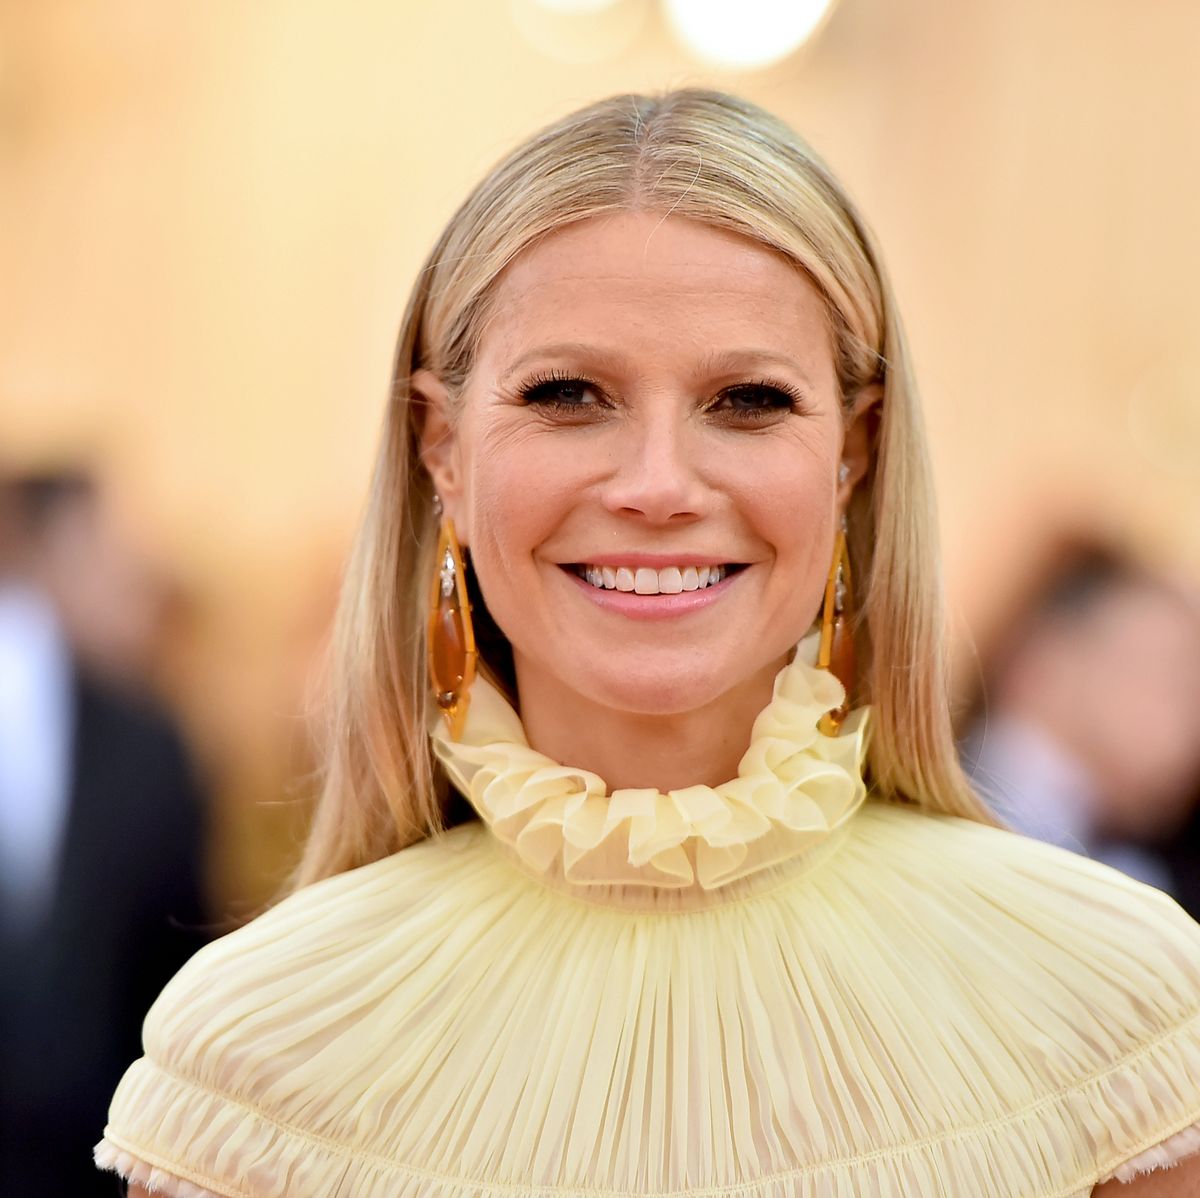 Gwyneth Paltrow's At-Home Wellness Routine